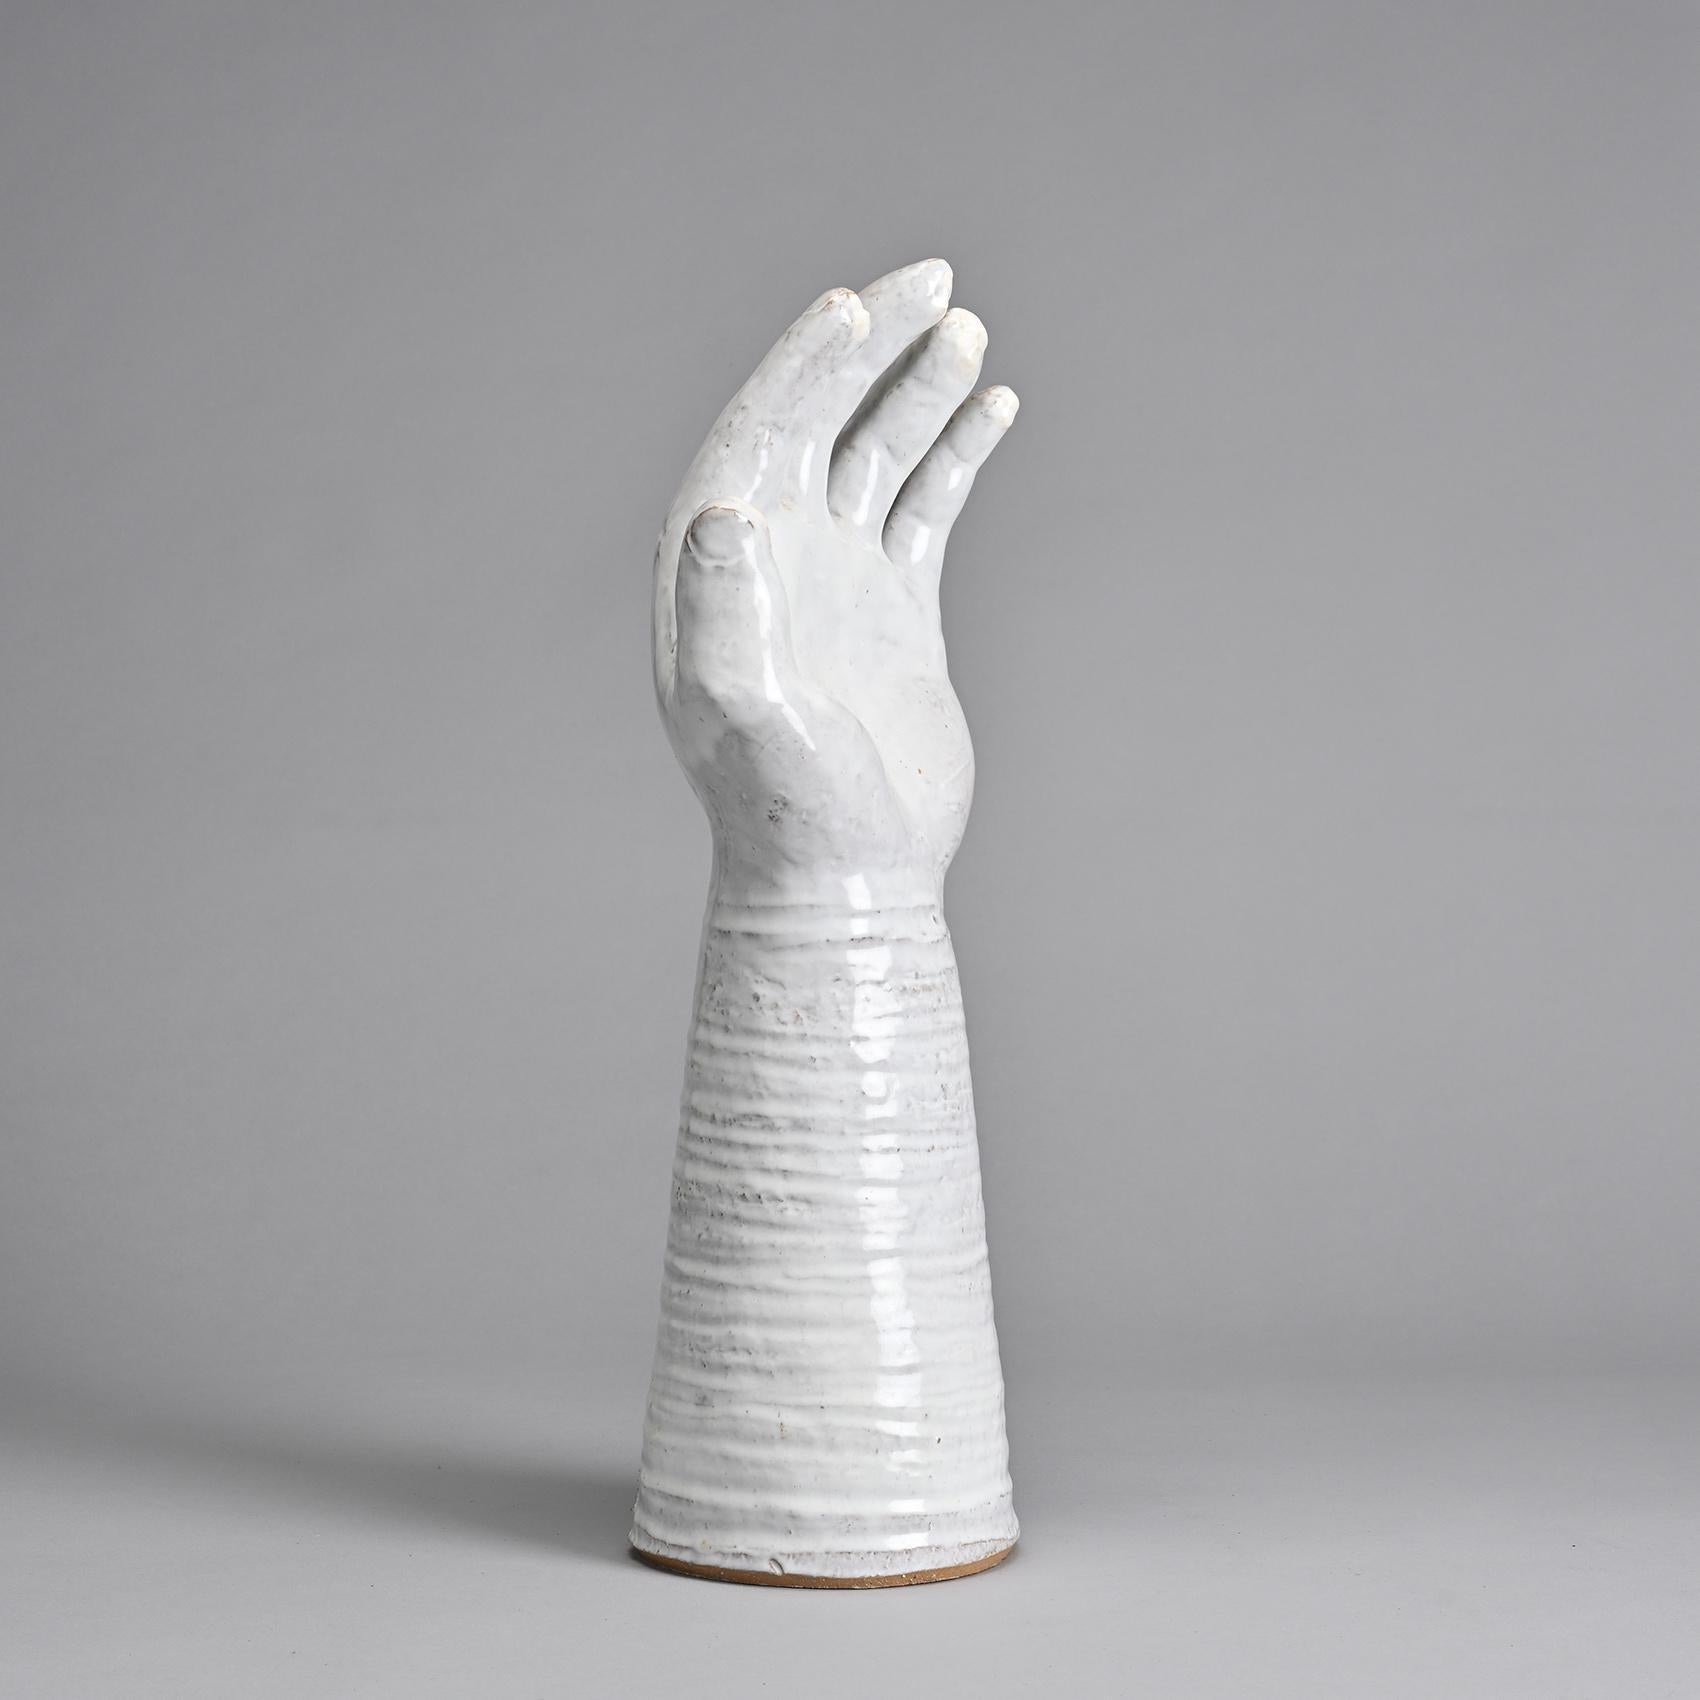 French Sculpture of a Hand by the Cloutier Brothers, Unique Piece